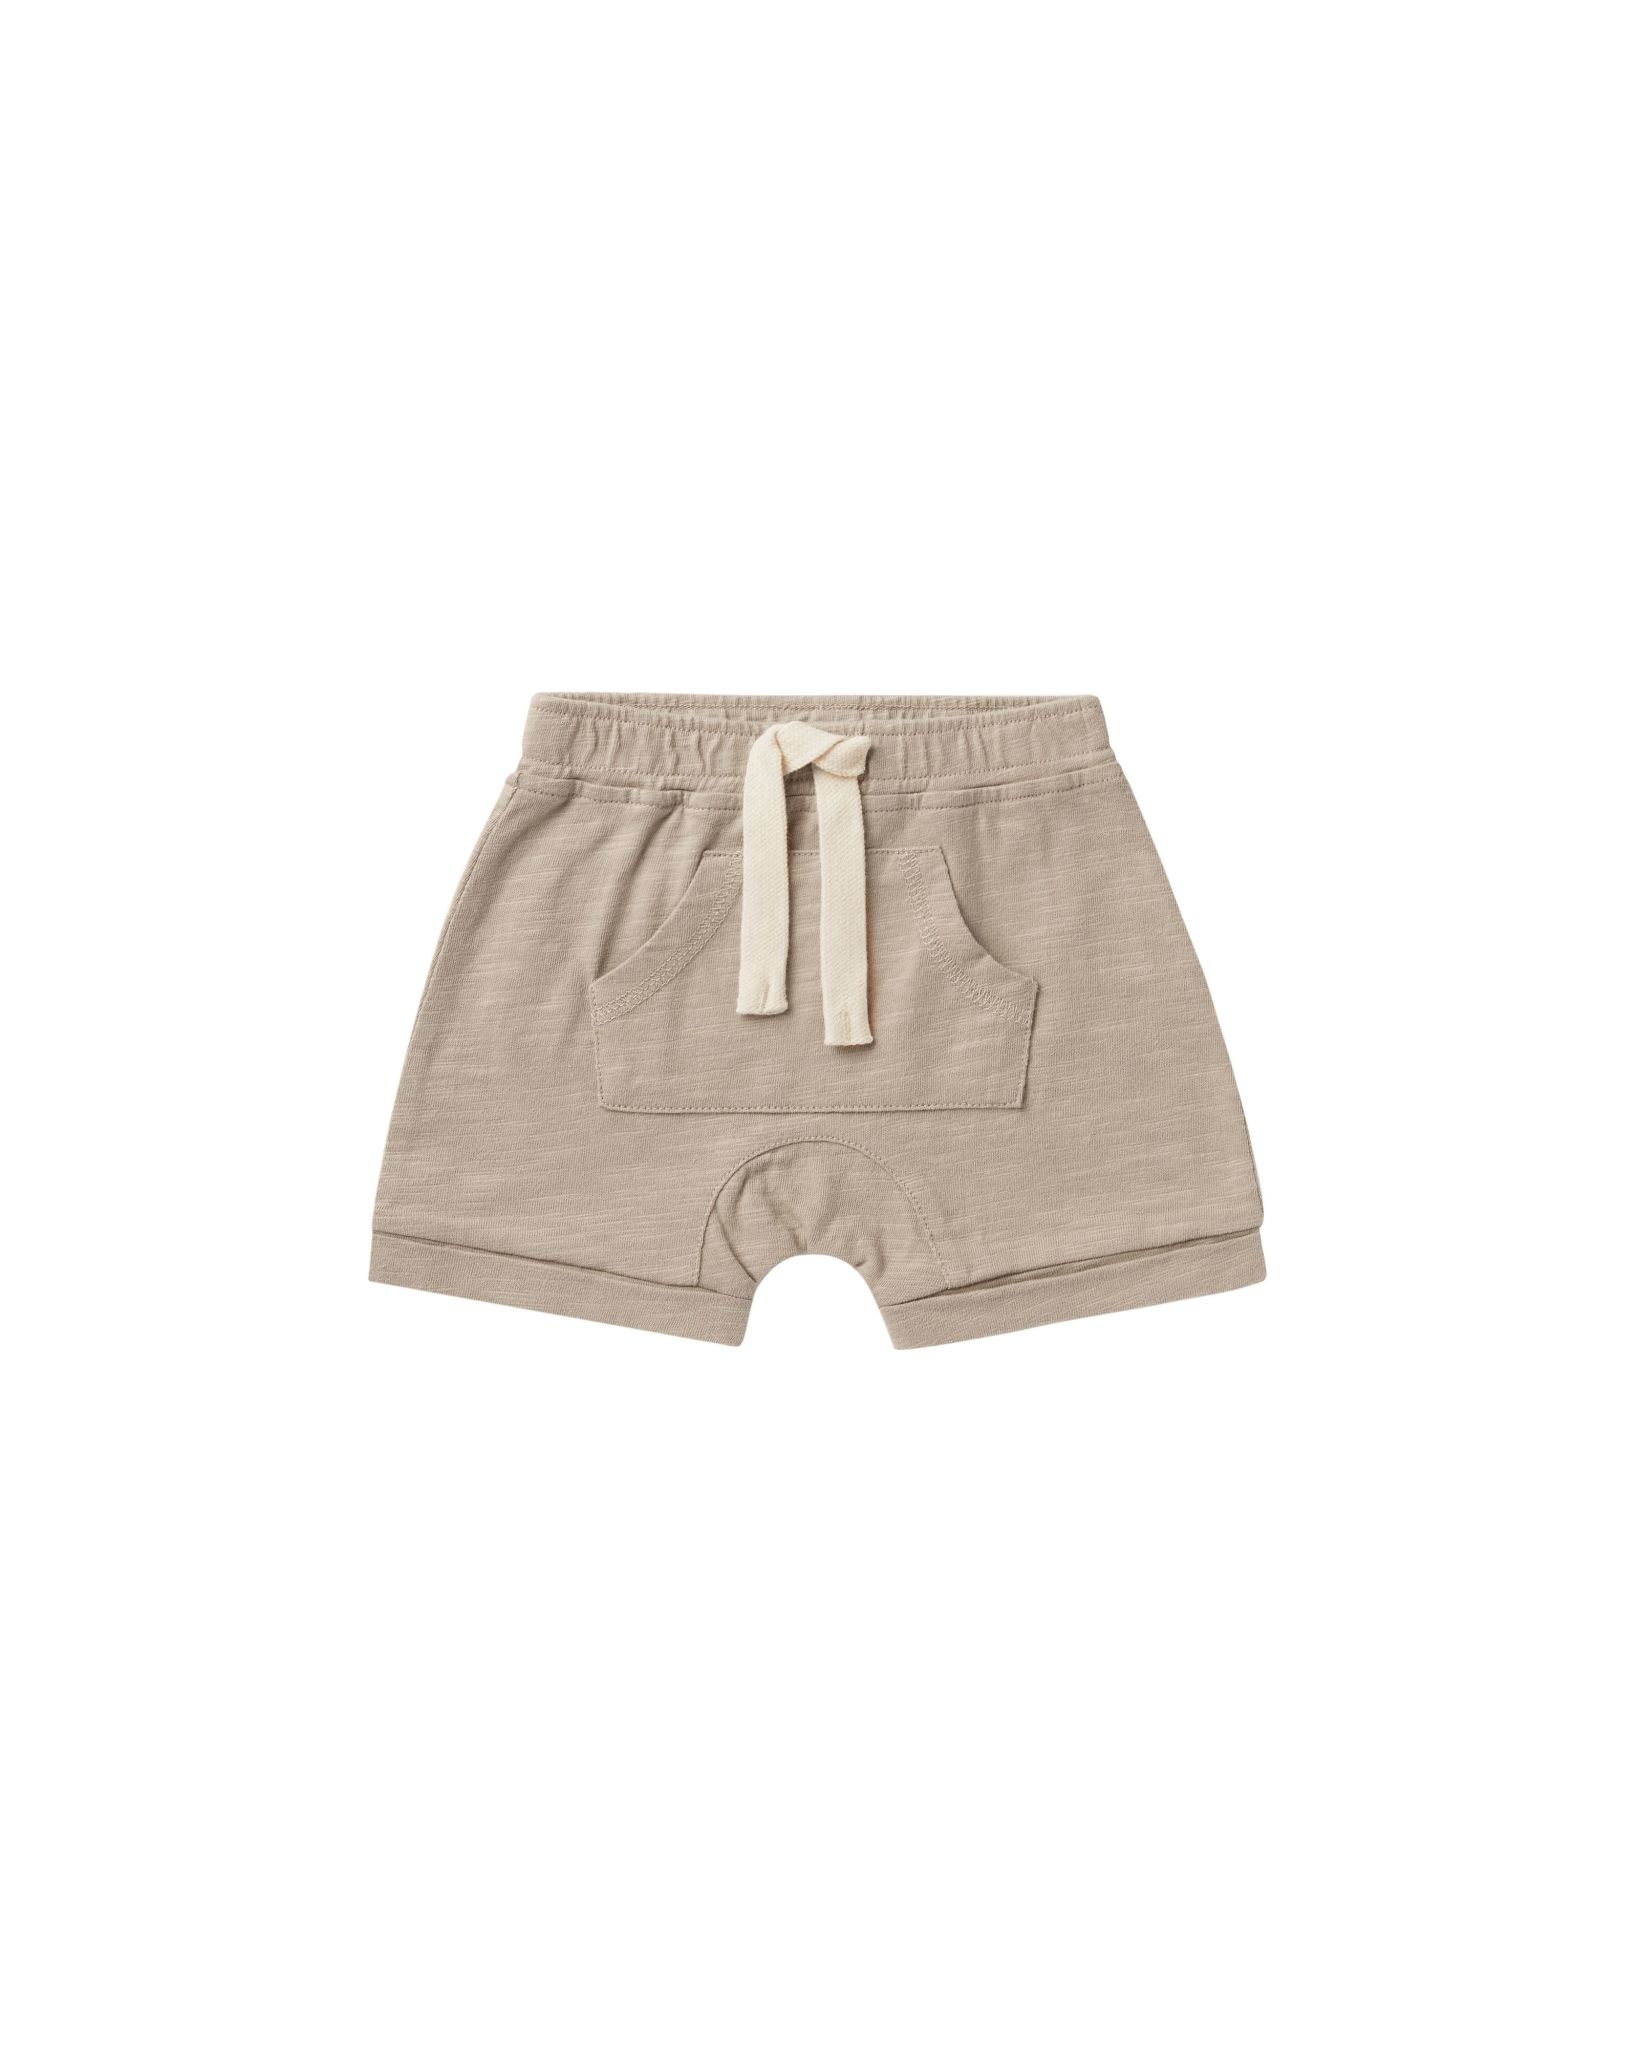 Rylee and Cru Rylee & Cru Front Pouch Short